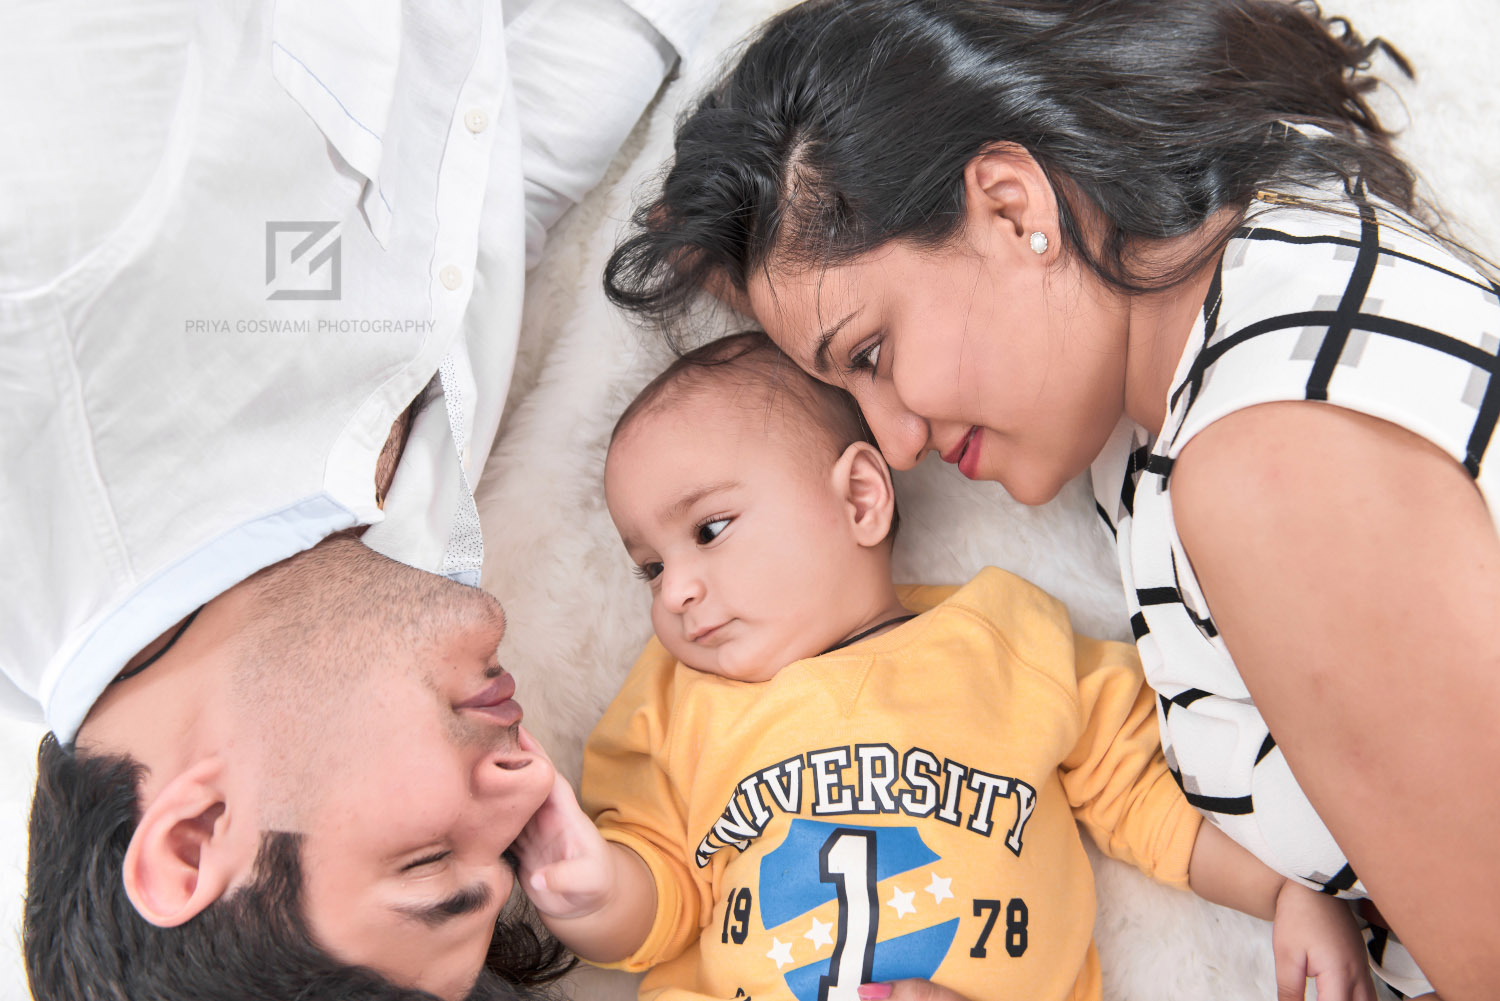 Top 5 poses for family photography | Unscripted Photographers